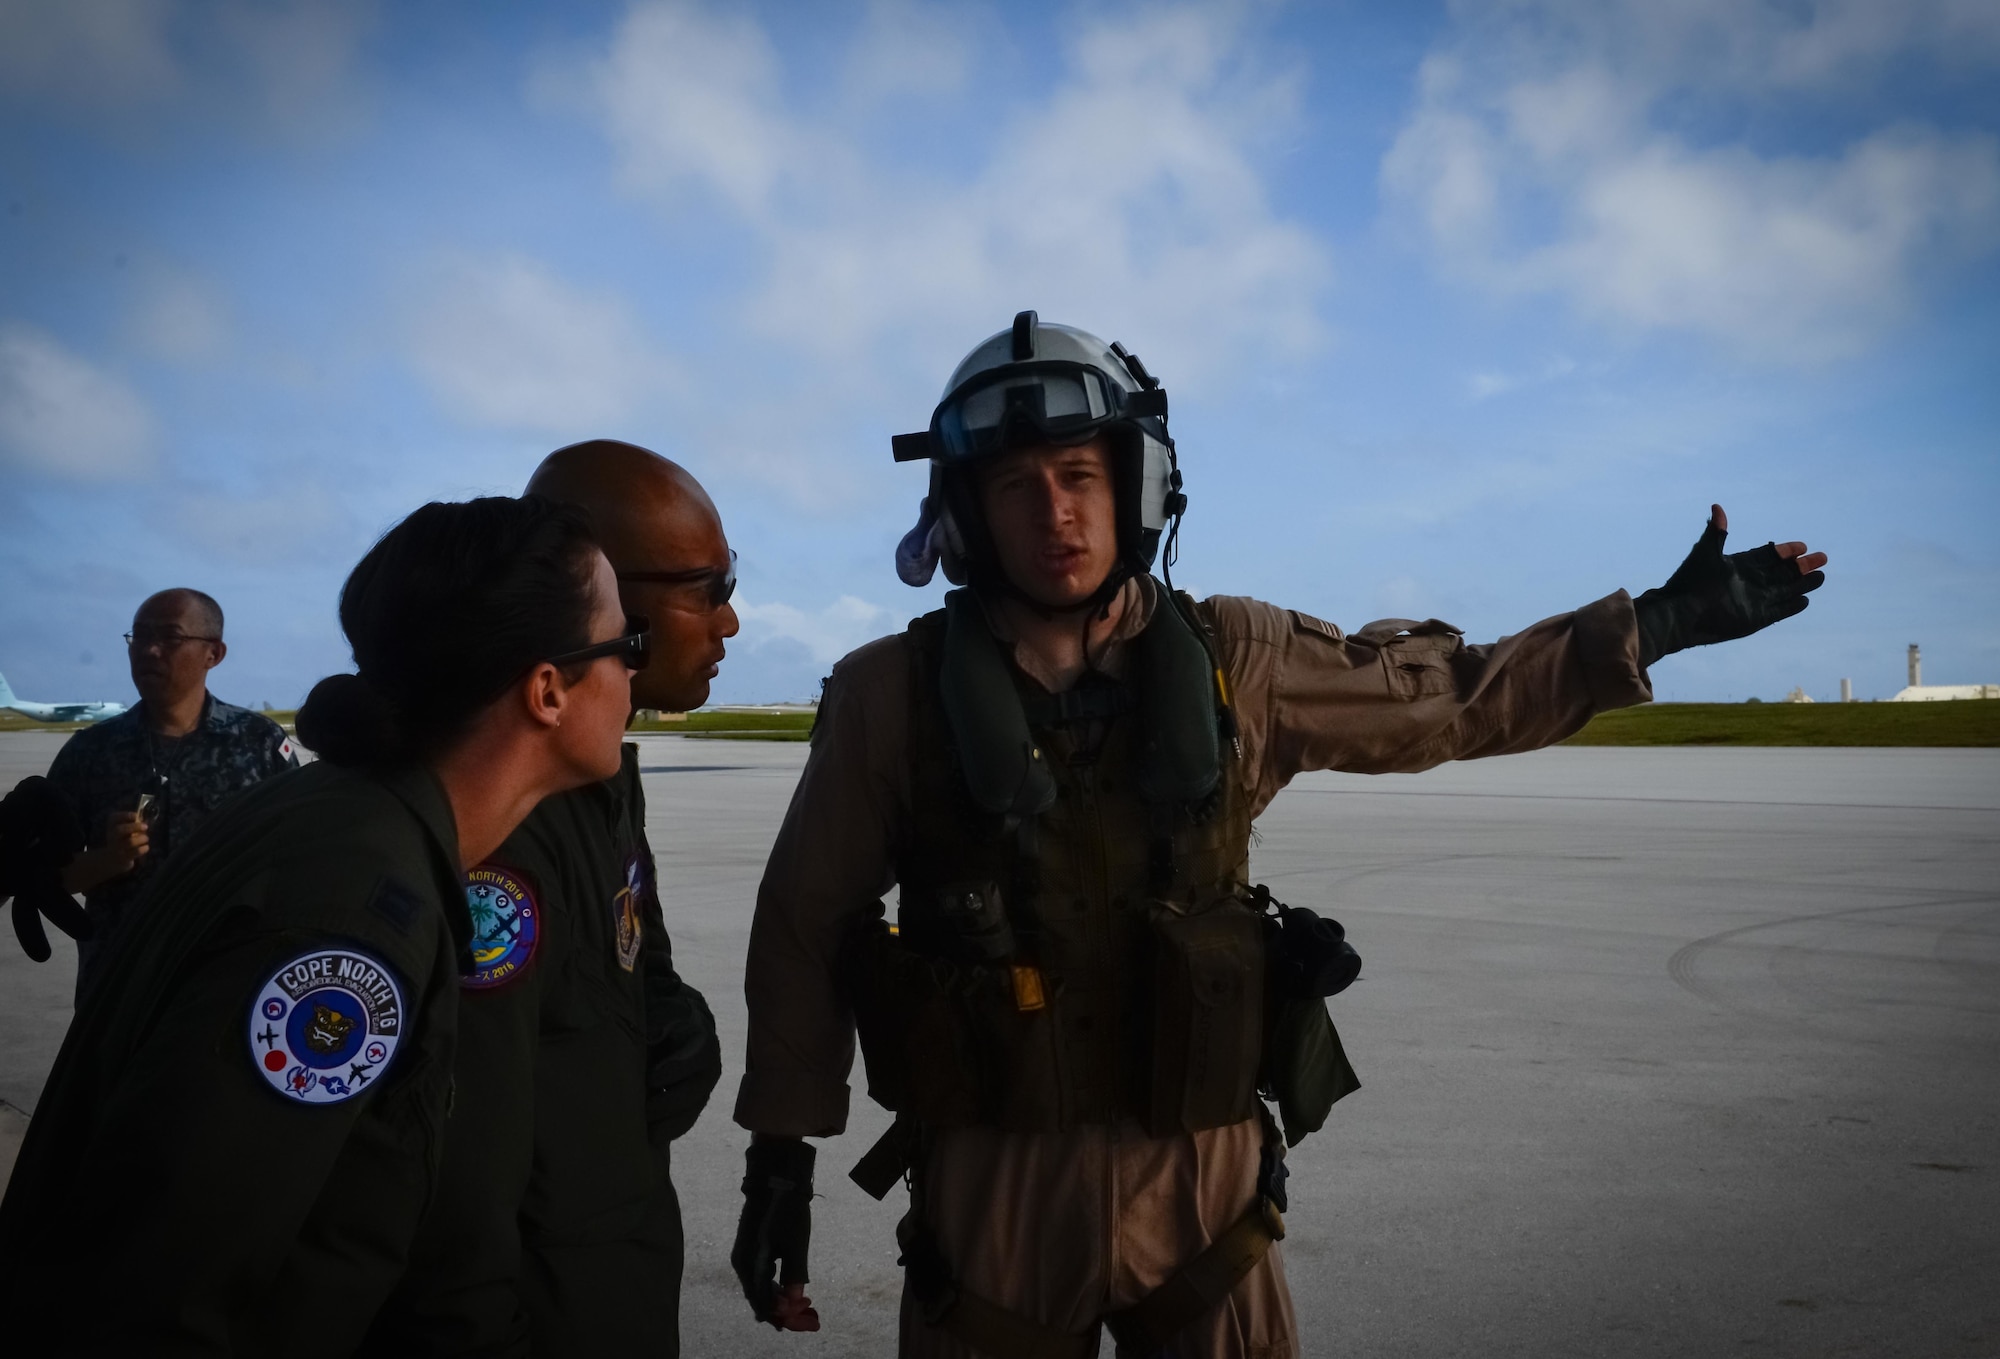 U.S. Navy Hospital Corpsman Brandon M. Smith, a search and rescue medical technician with Helicopter Sea Combat Squadron 25, right, gives patient information to a U.S. Air Force aeromedical evacuation crew during a patient transfer Feb. 17, 2016, at Andersen Air Force Base, Guam. Exercise Cope North 16 enhances humanitarian assistance and disaster relief crisis response capabilities between six nations and lays the foundation for regional cooperation expansion during real-world contingencies in the Indo-Asia-Pacific Region. (U.S. Air Force photo by Staff Sgt. Alexander W. Riedel/Released)